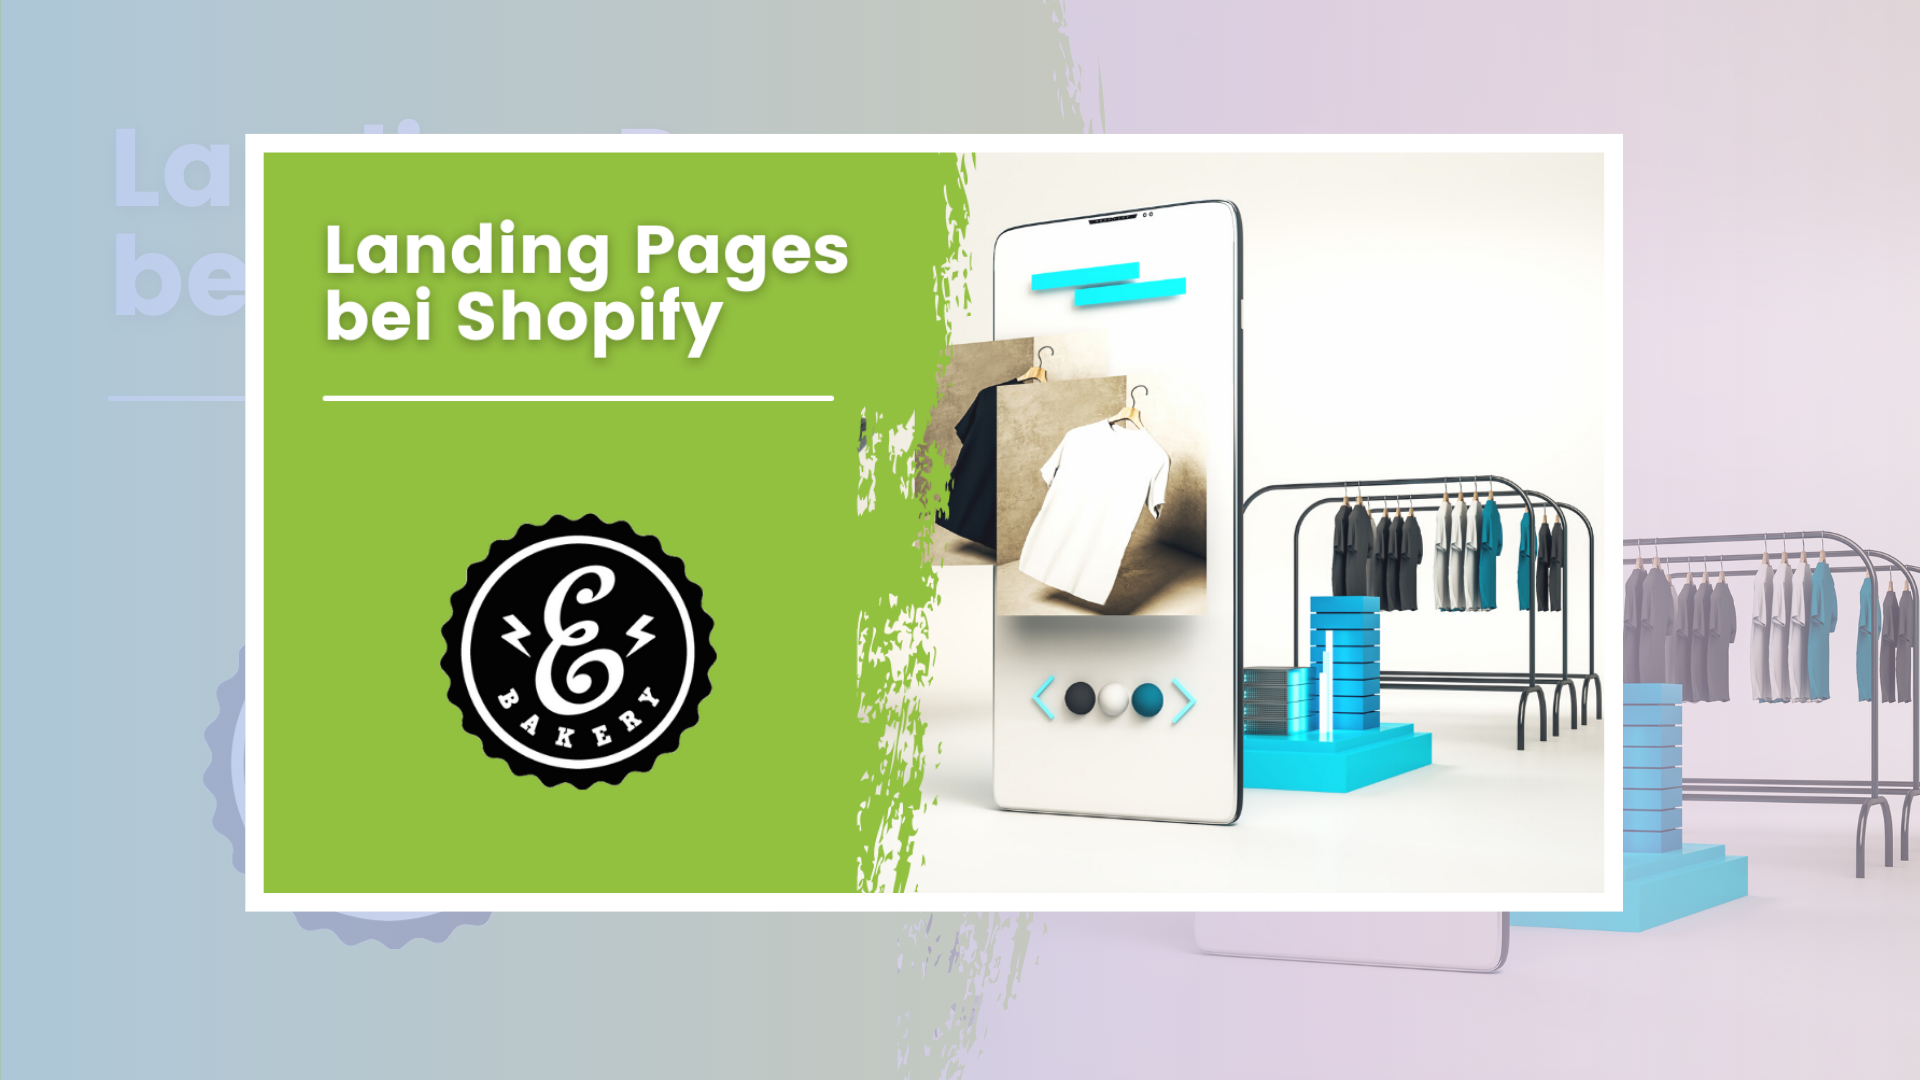 Landing Pages bei Shopify